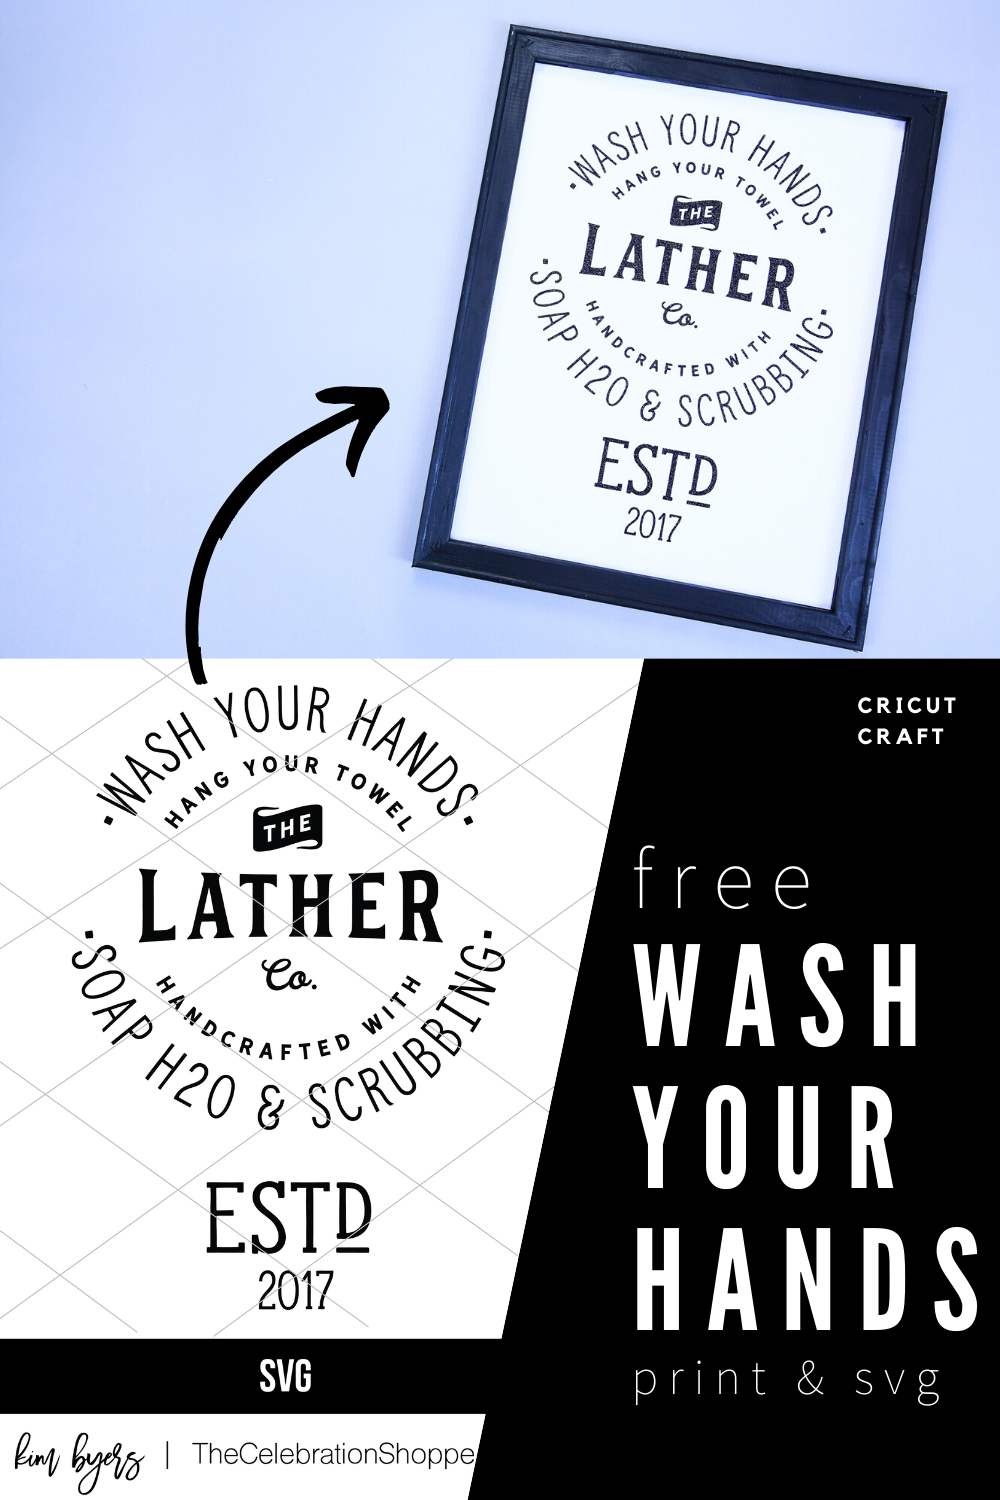 FREE Wash Your Hands Print & SVG - Make a reverse canvas with iron-on and your Cricut or print it! 